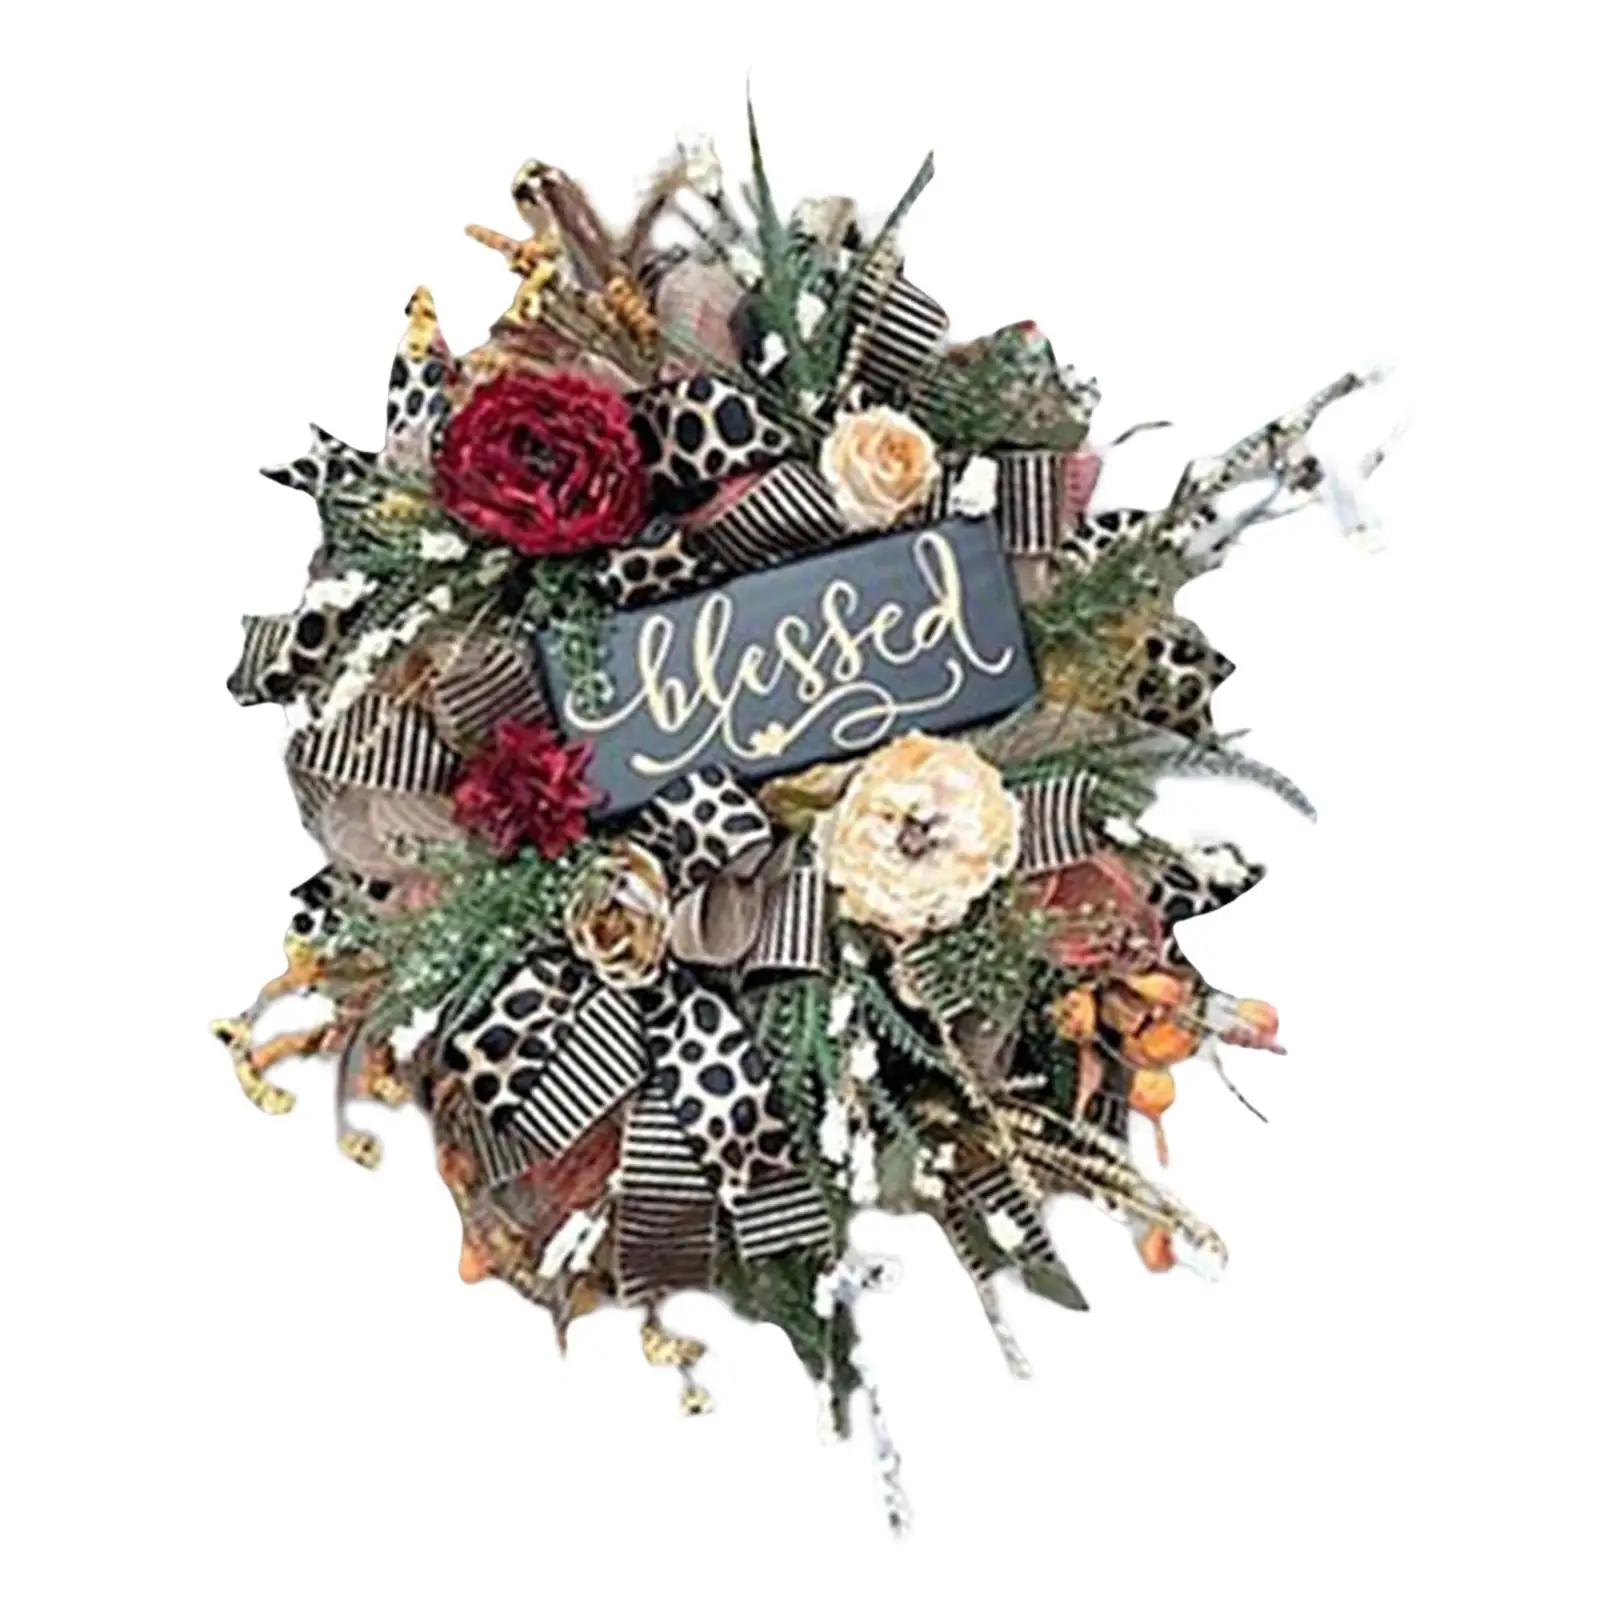 Door Front Welcome Wreath Artificial Flowers Garland Fall Bowknot Decorative for Backdrop Window Thanksgiving Day Holiday Office